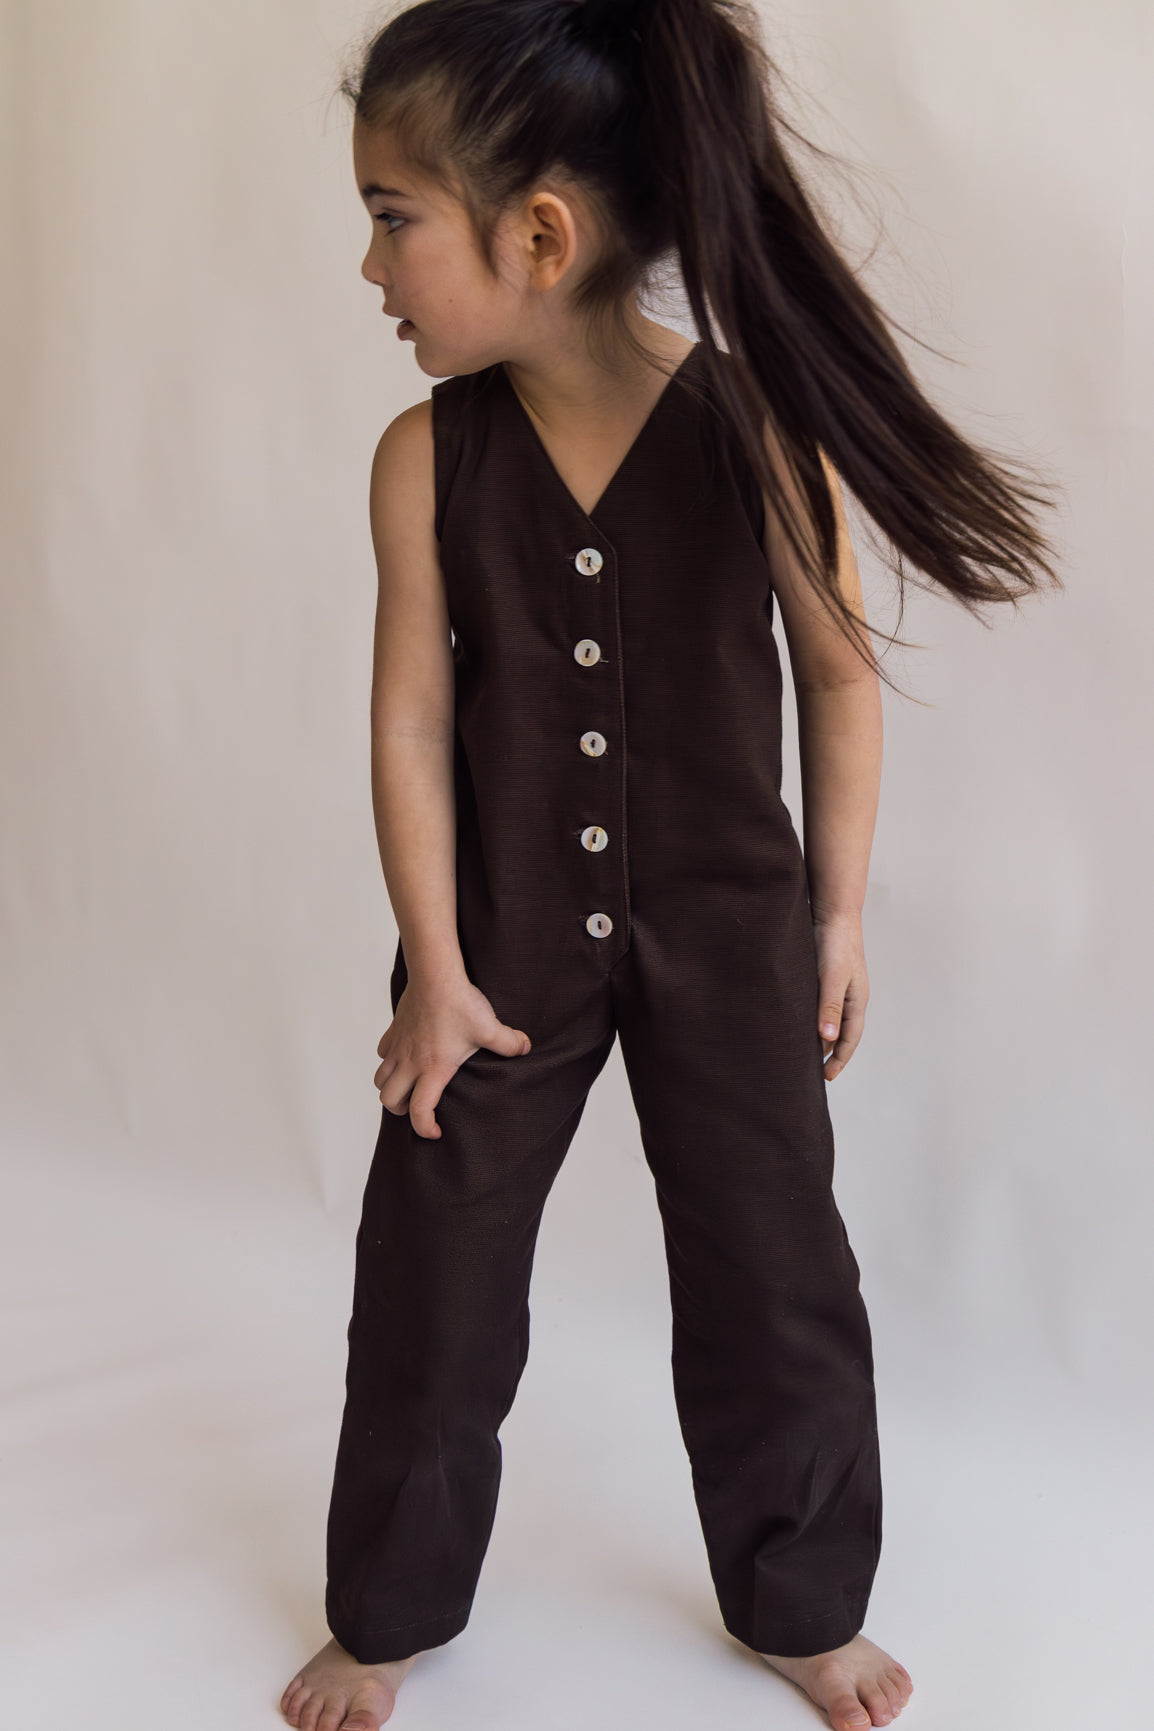 Dark Brown umber chocolate color Kids Mini Jumpsuit overall workwear cotton canvas 5 buttons v-neck OEKO-TEX sustainable clothes handmade